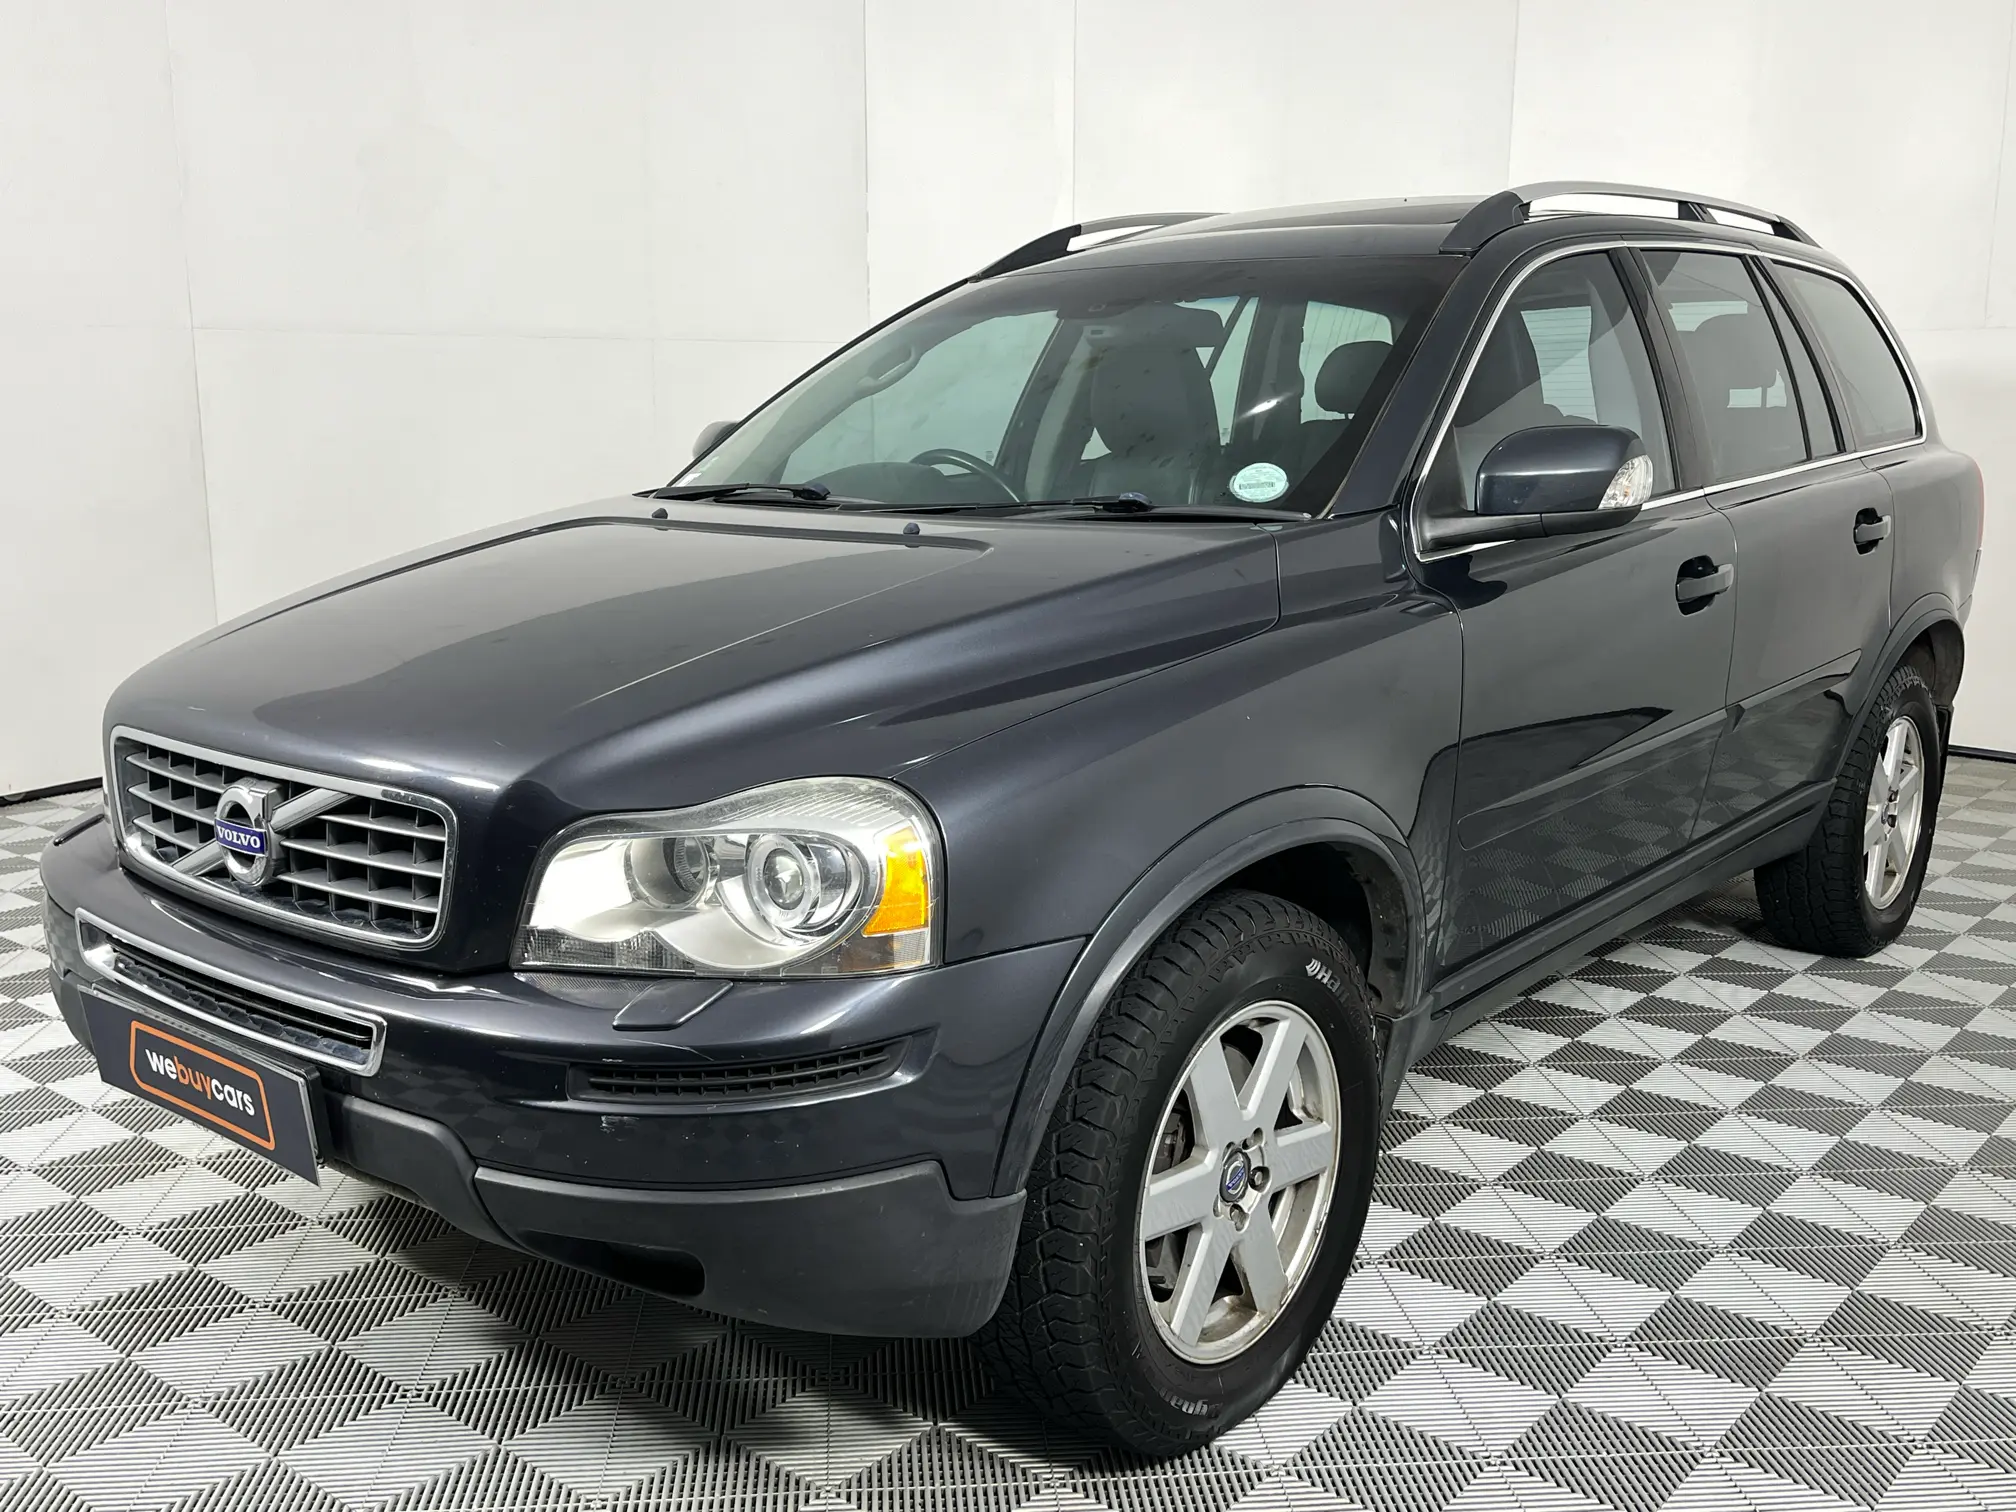 2012 Volvo XC 90 D5 Geartronic AWD